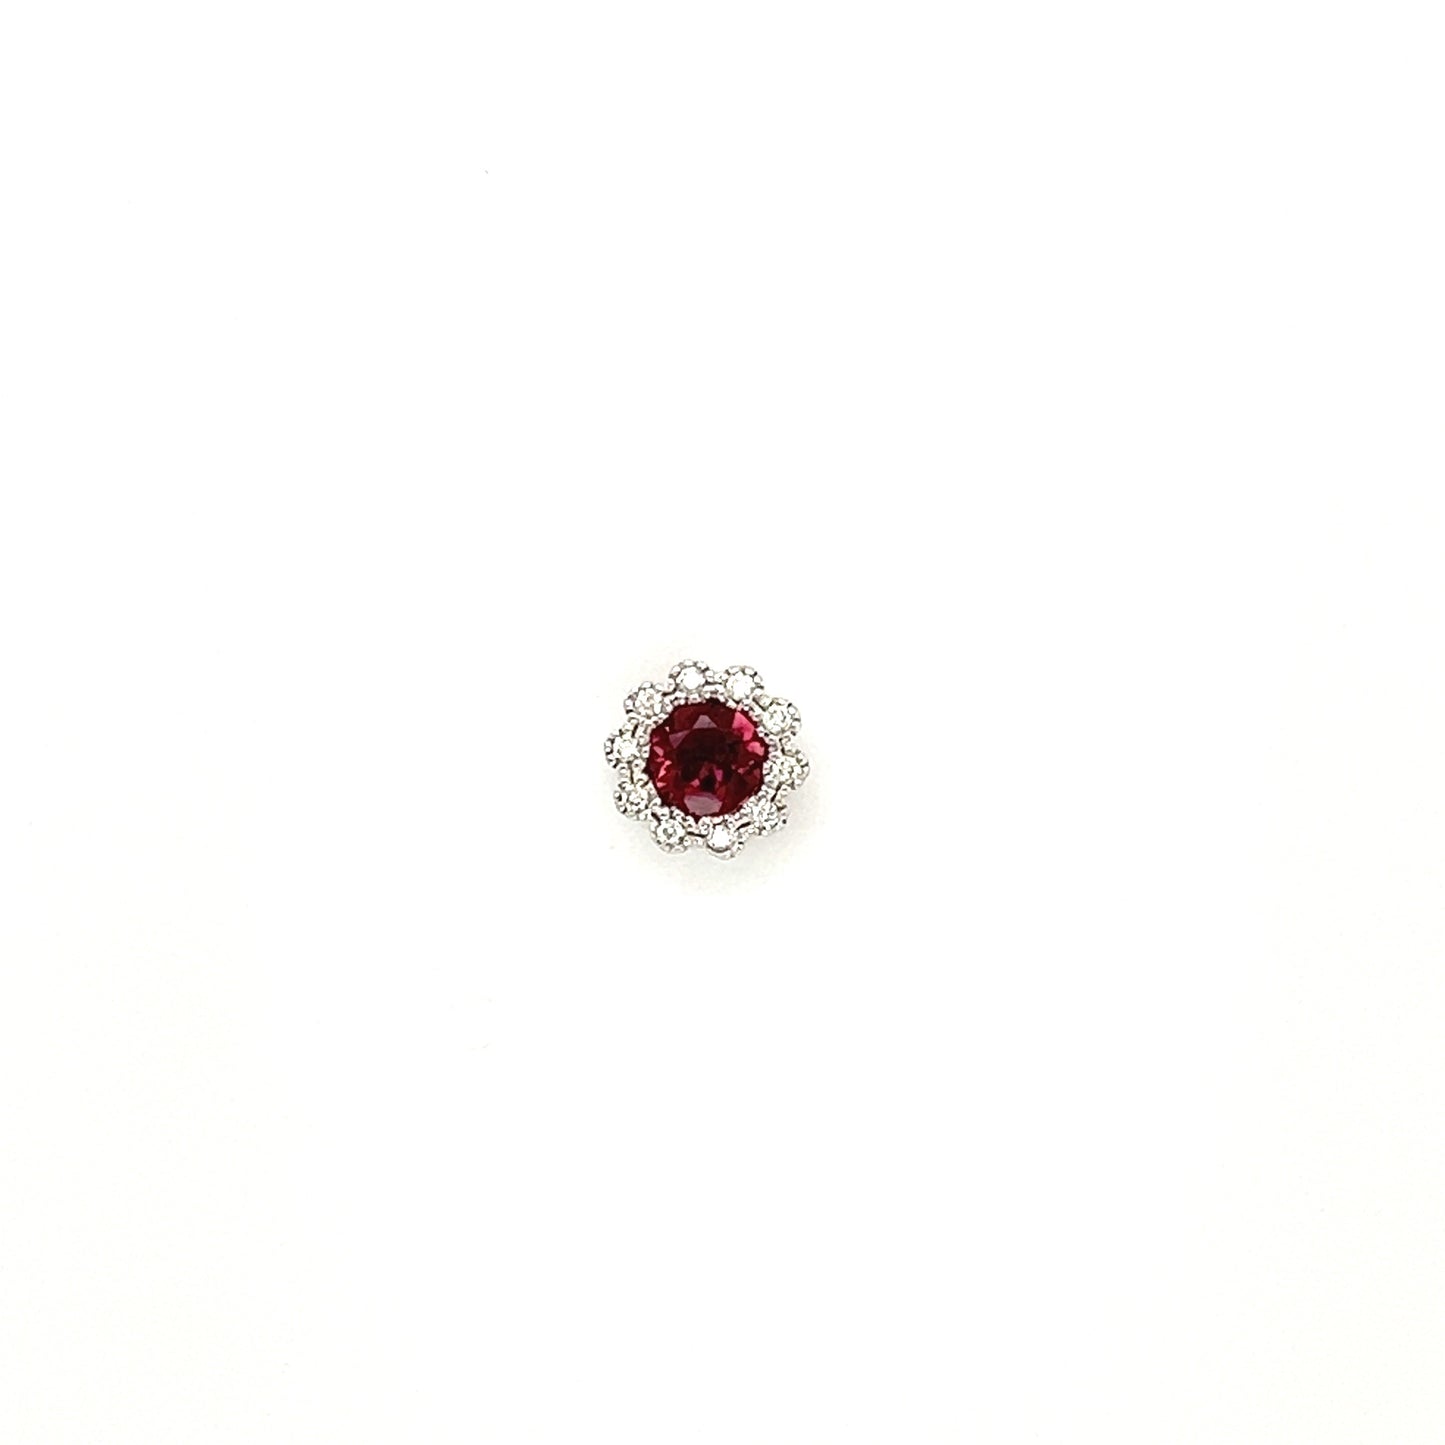 Floral Tourmaline Pendant with Diamond Halo in 14K White Gold Pendant Front View